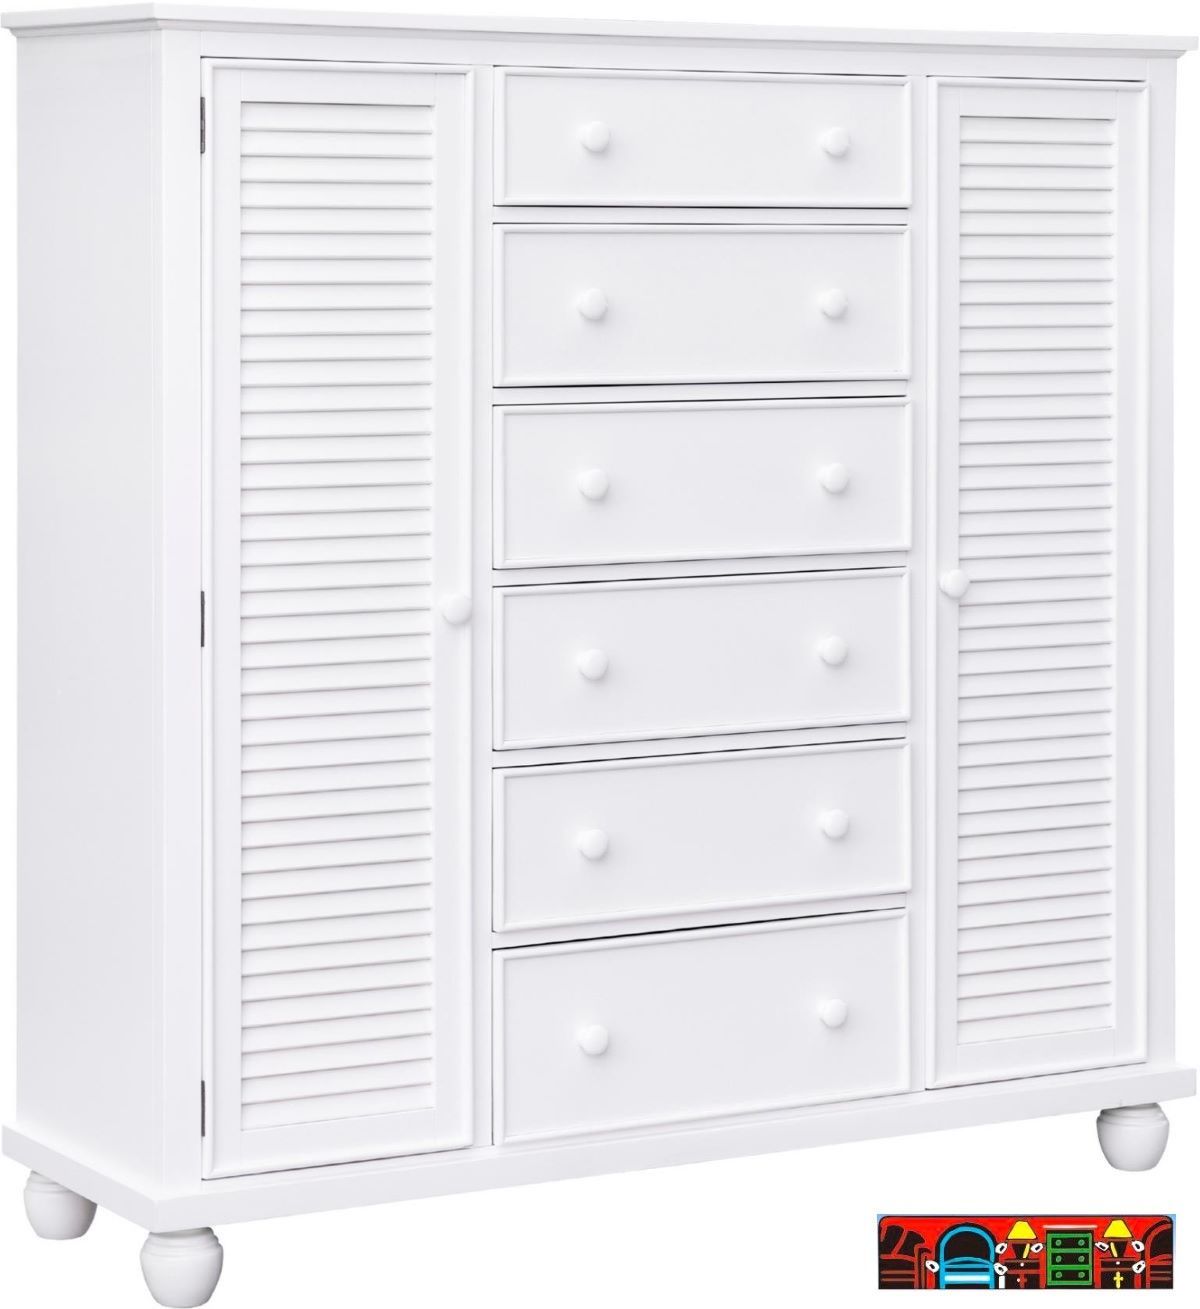 Nantucket Chifforobe in white, crafted from solid wood, featuring six drawers, two doors, and bun feet.